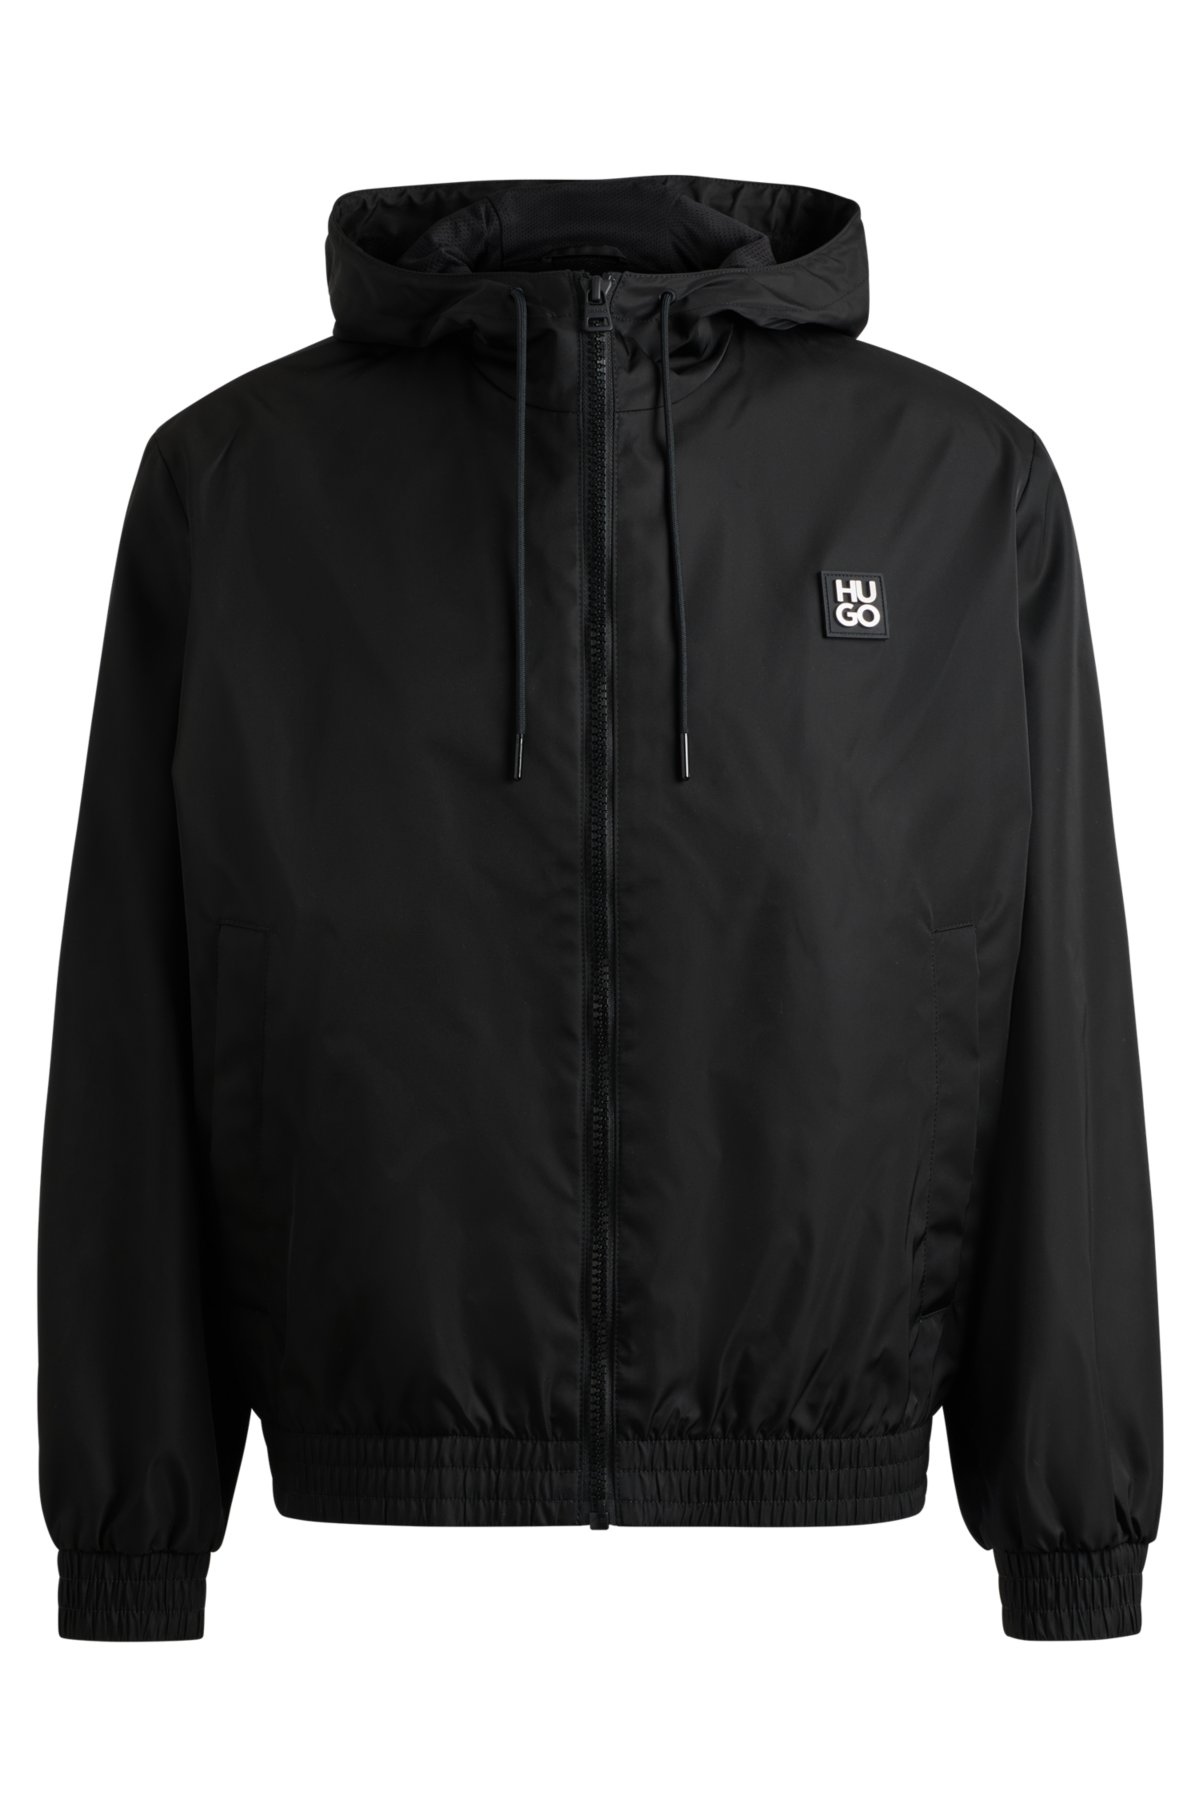 Water-repellent hooded jacket with stacked-logo trim, Black